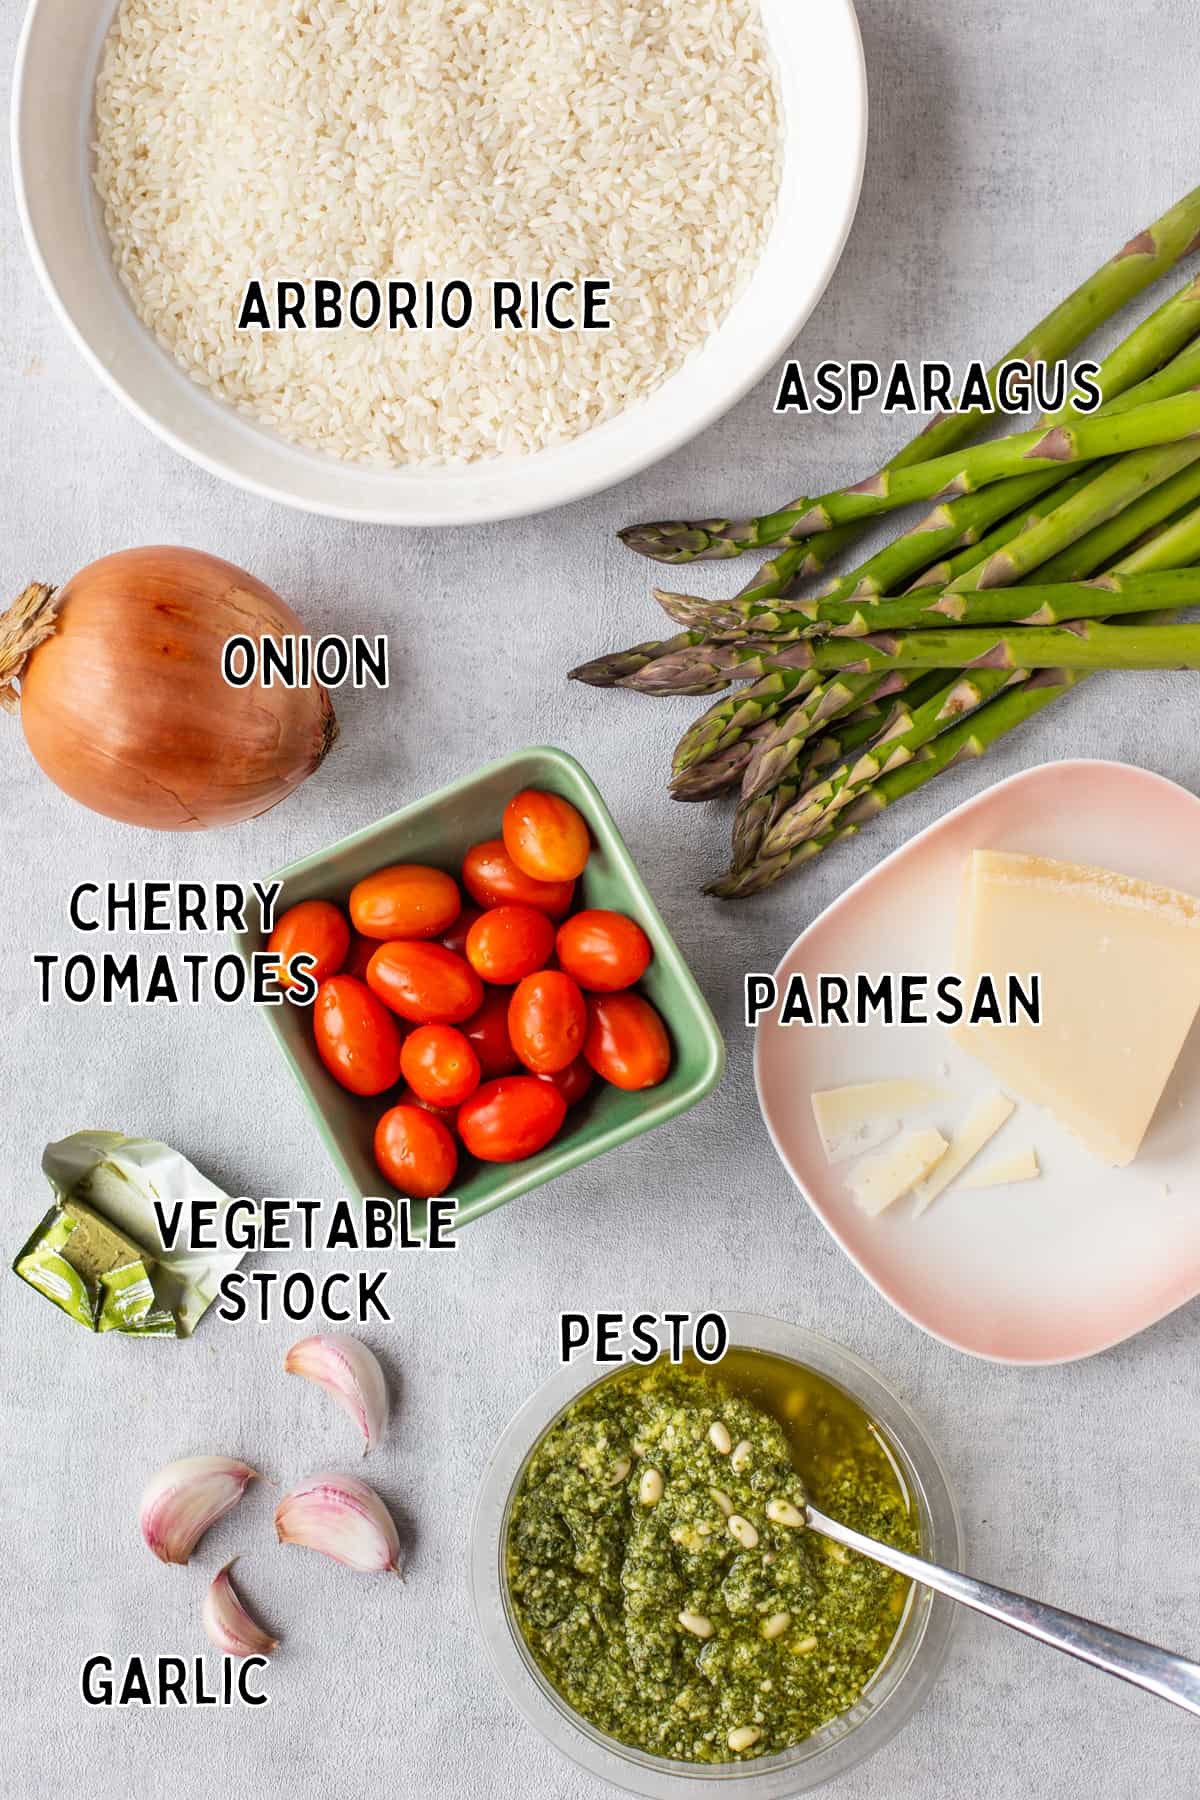 Ingredients for baked asparagus risotto laid out with text overlay.